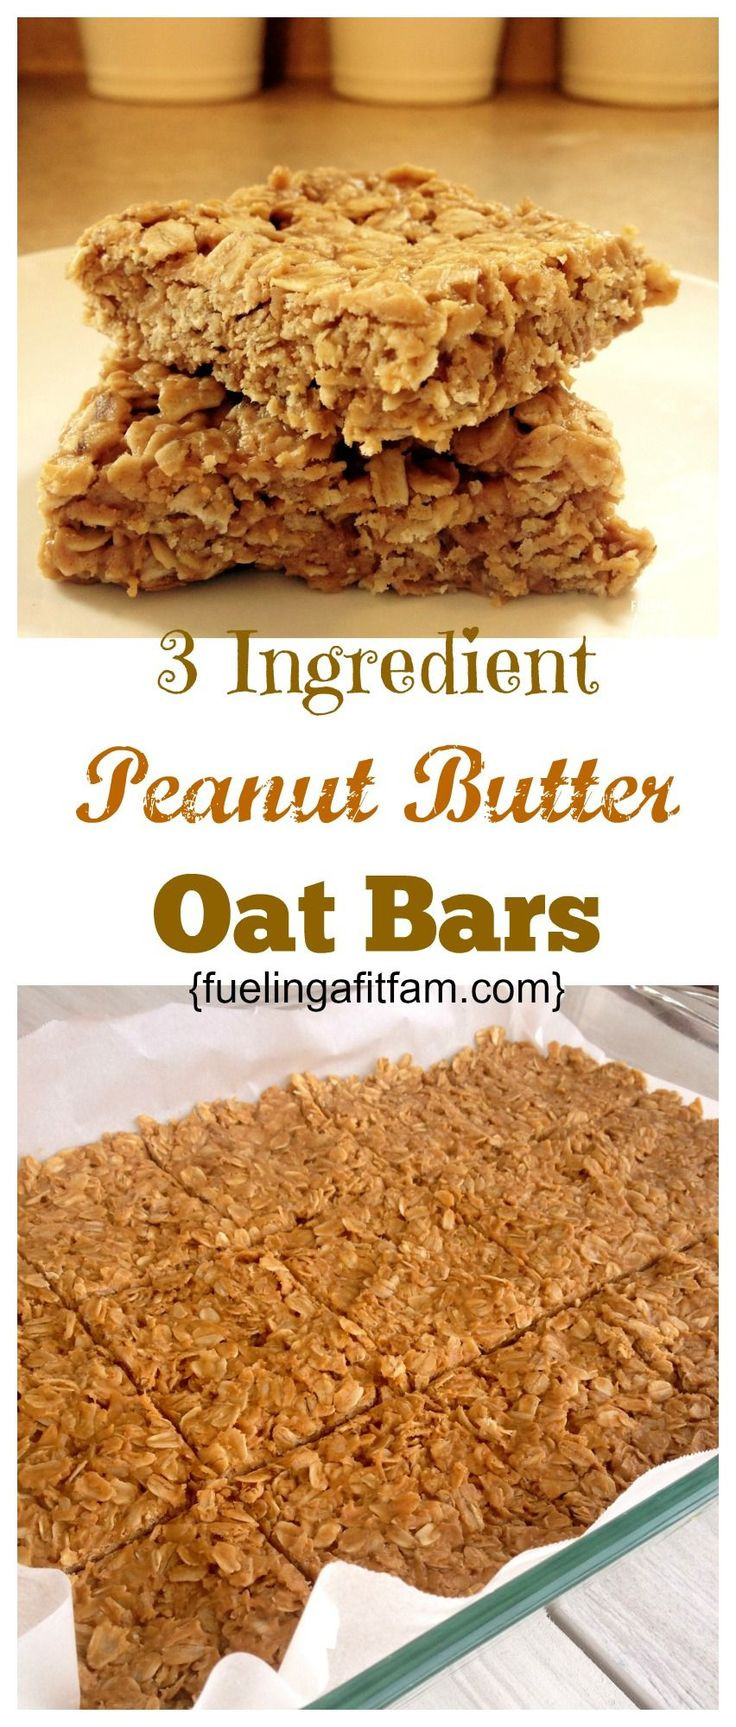 Are Rolled Oats Healthy
 Tasty Rolled oats recipe on Pinterest